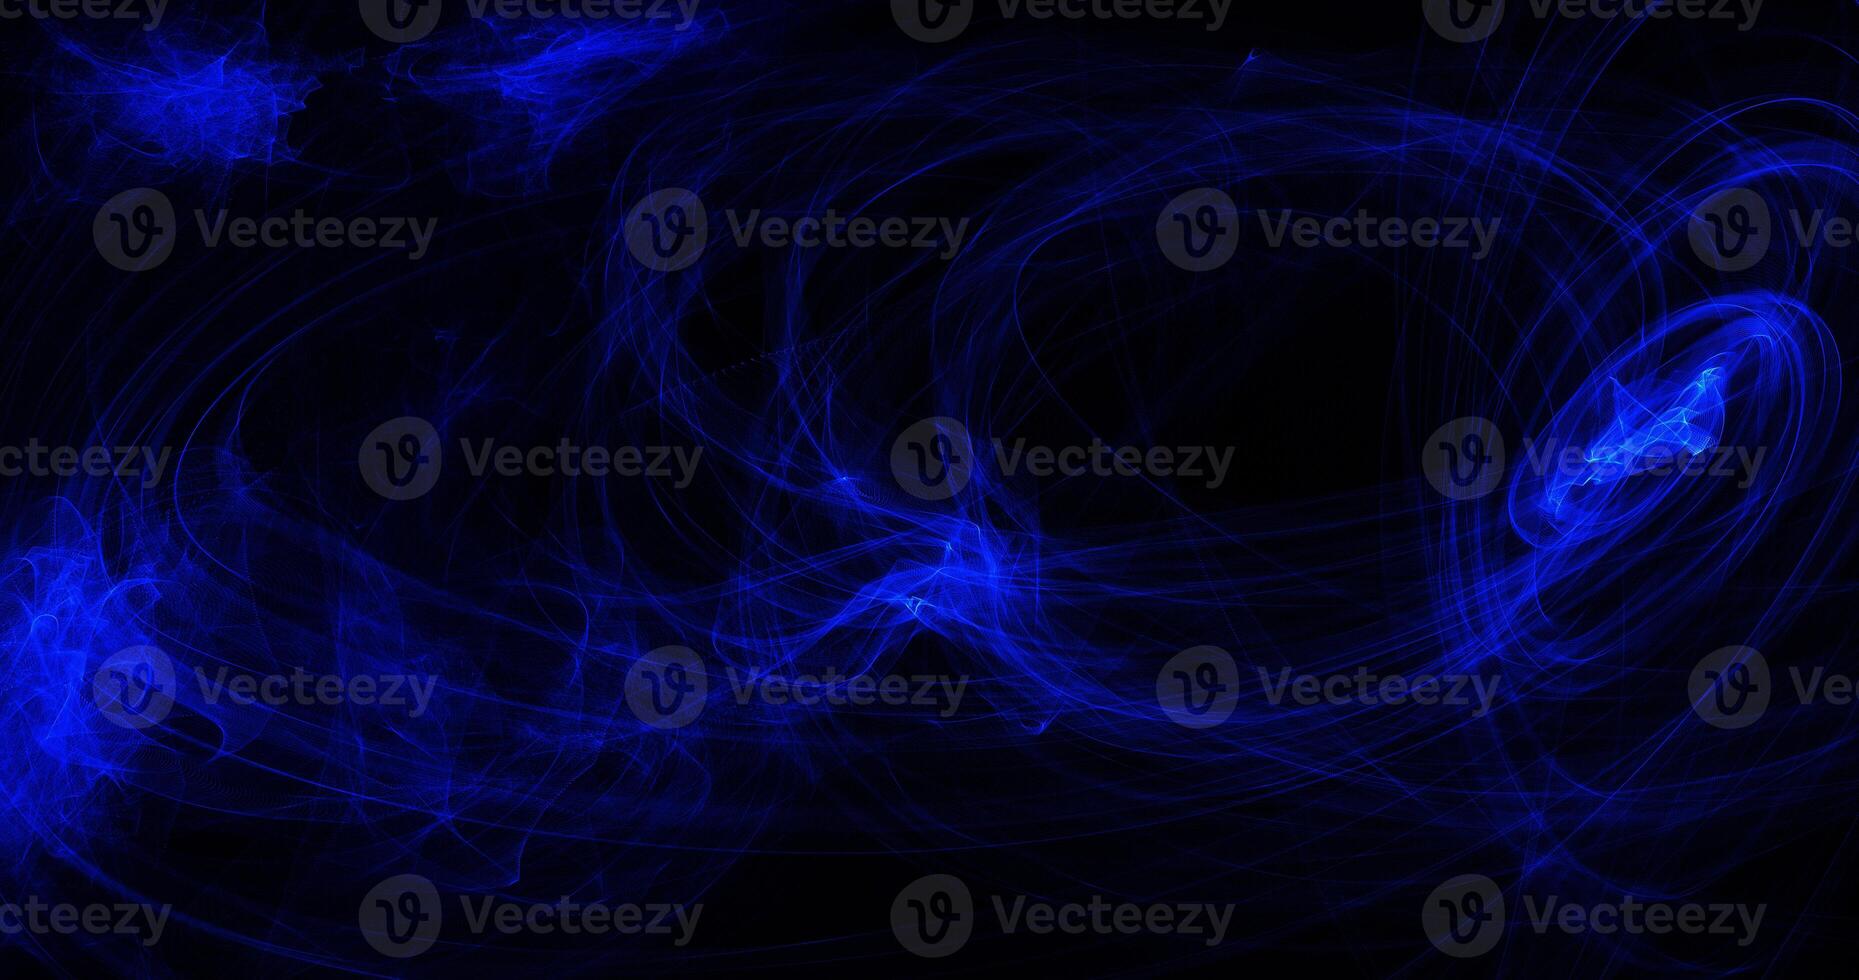 Abstract Blue Lines Curves Swirls On Dark Background photo